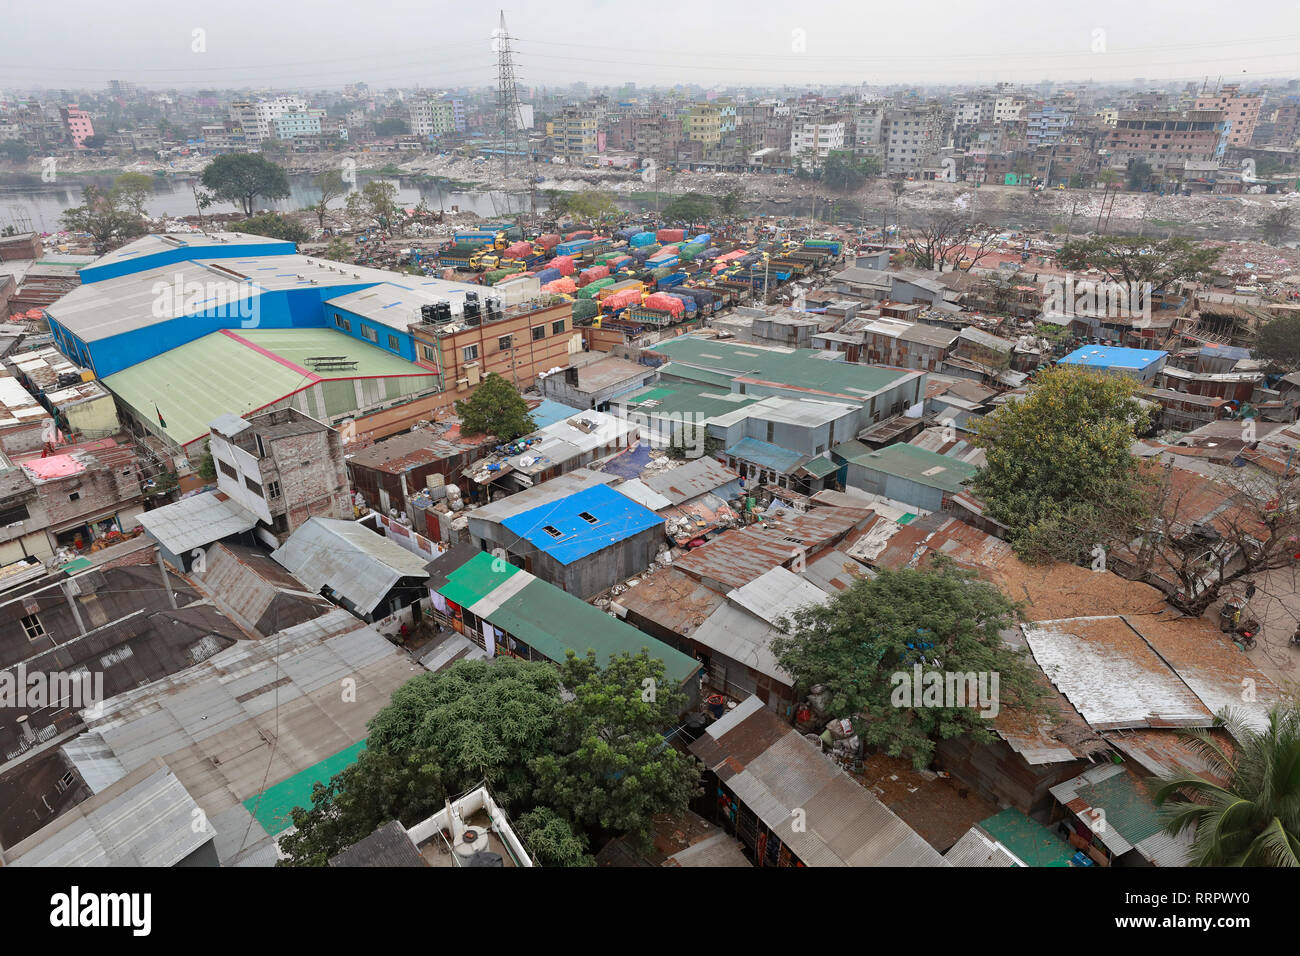 Dhaka, Bangladesh - February 26, 2019: A view of the Dhaka Metropolitan city Lalbagh area Dhaka. A city of over 15 million people, appears to be bursting at the seams. It presents, almost everywhere, a spectacle of squalor, shanty dwellings, awful traffic congestion, shortage of basic utility services, lack of recreation sites or natural parks and playgrounds, unclean air, intrusion of commercial establishments and manufacturing into residential areas, etc. Credit: SK Hasan Ali/Alamy Live News Stock Photo